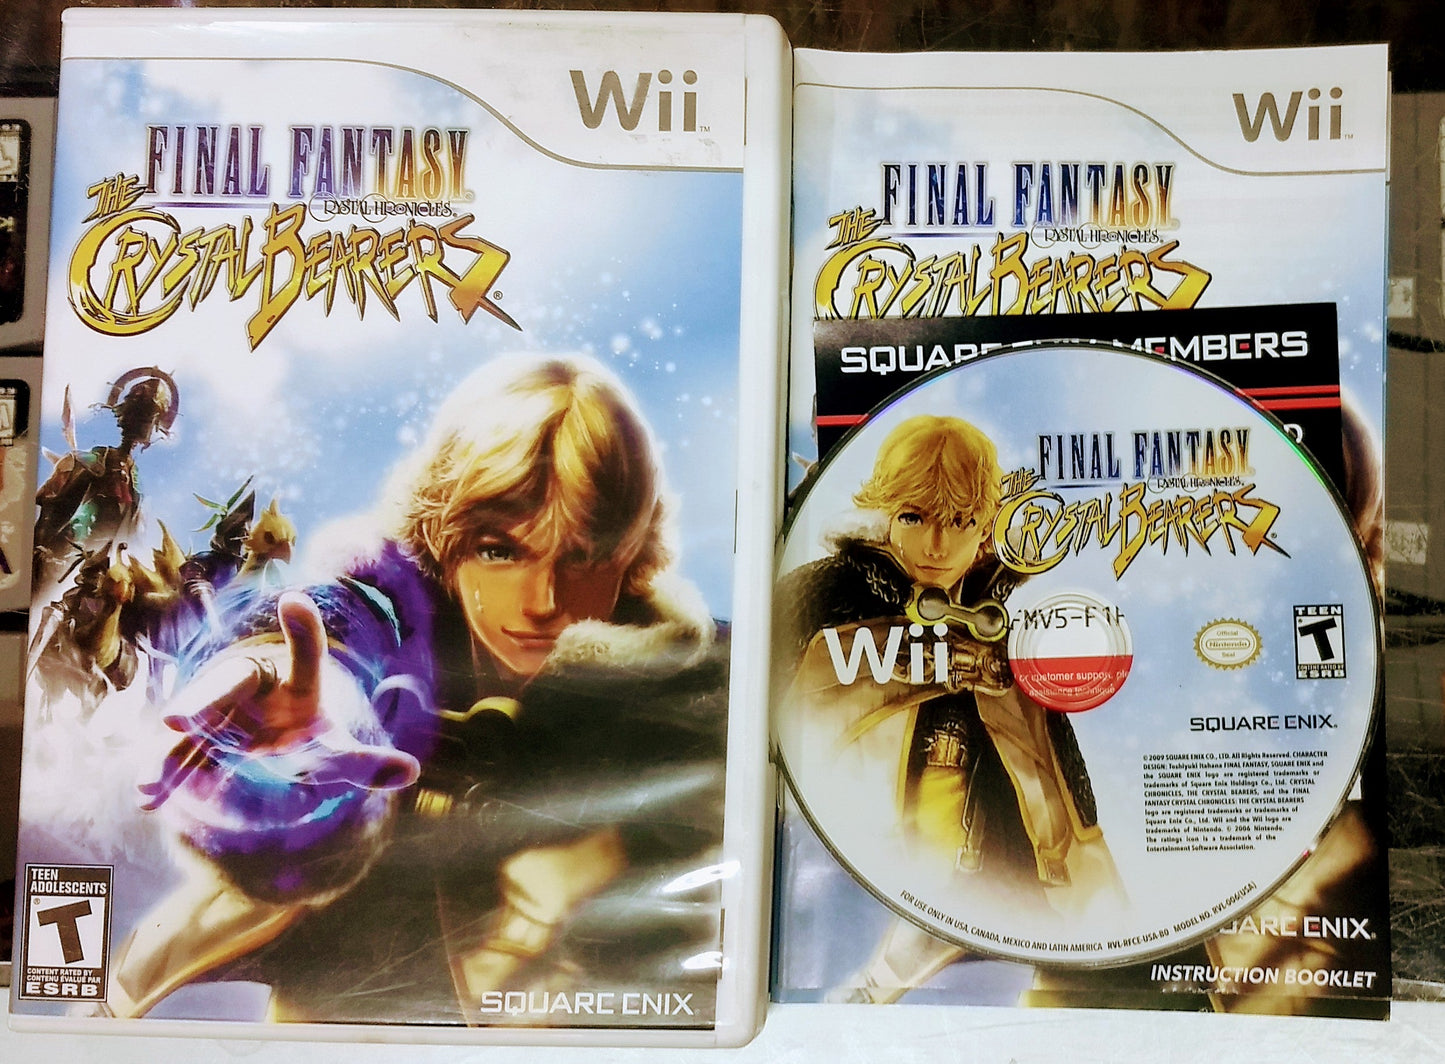 FINAL FANTASY CRYSTAL CHRONICLES: CRYSTAL BEARERS NINTENDO WII - jeux video game-x